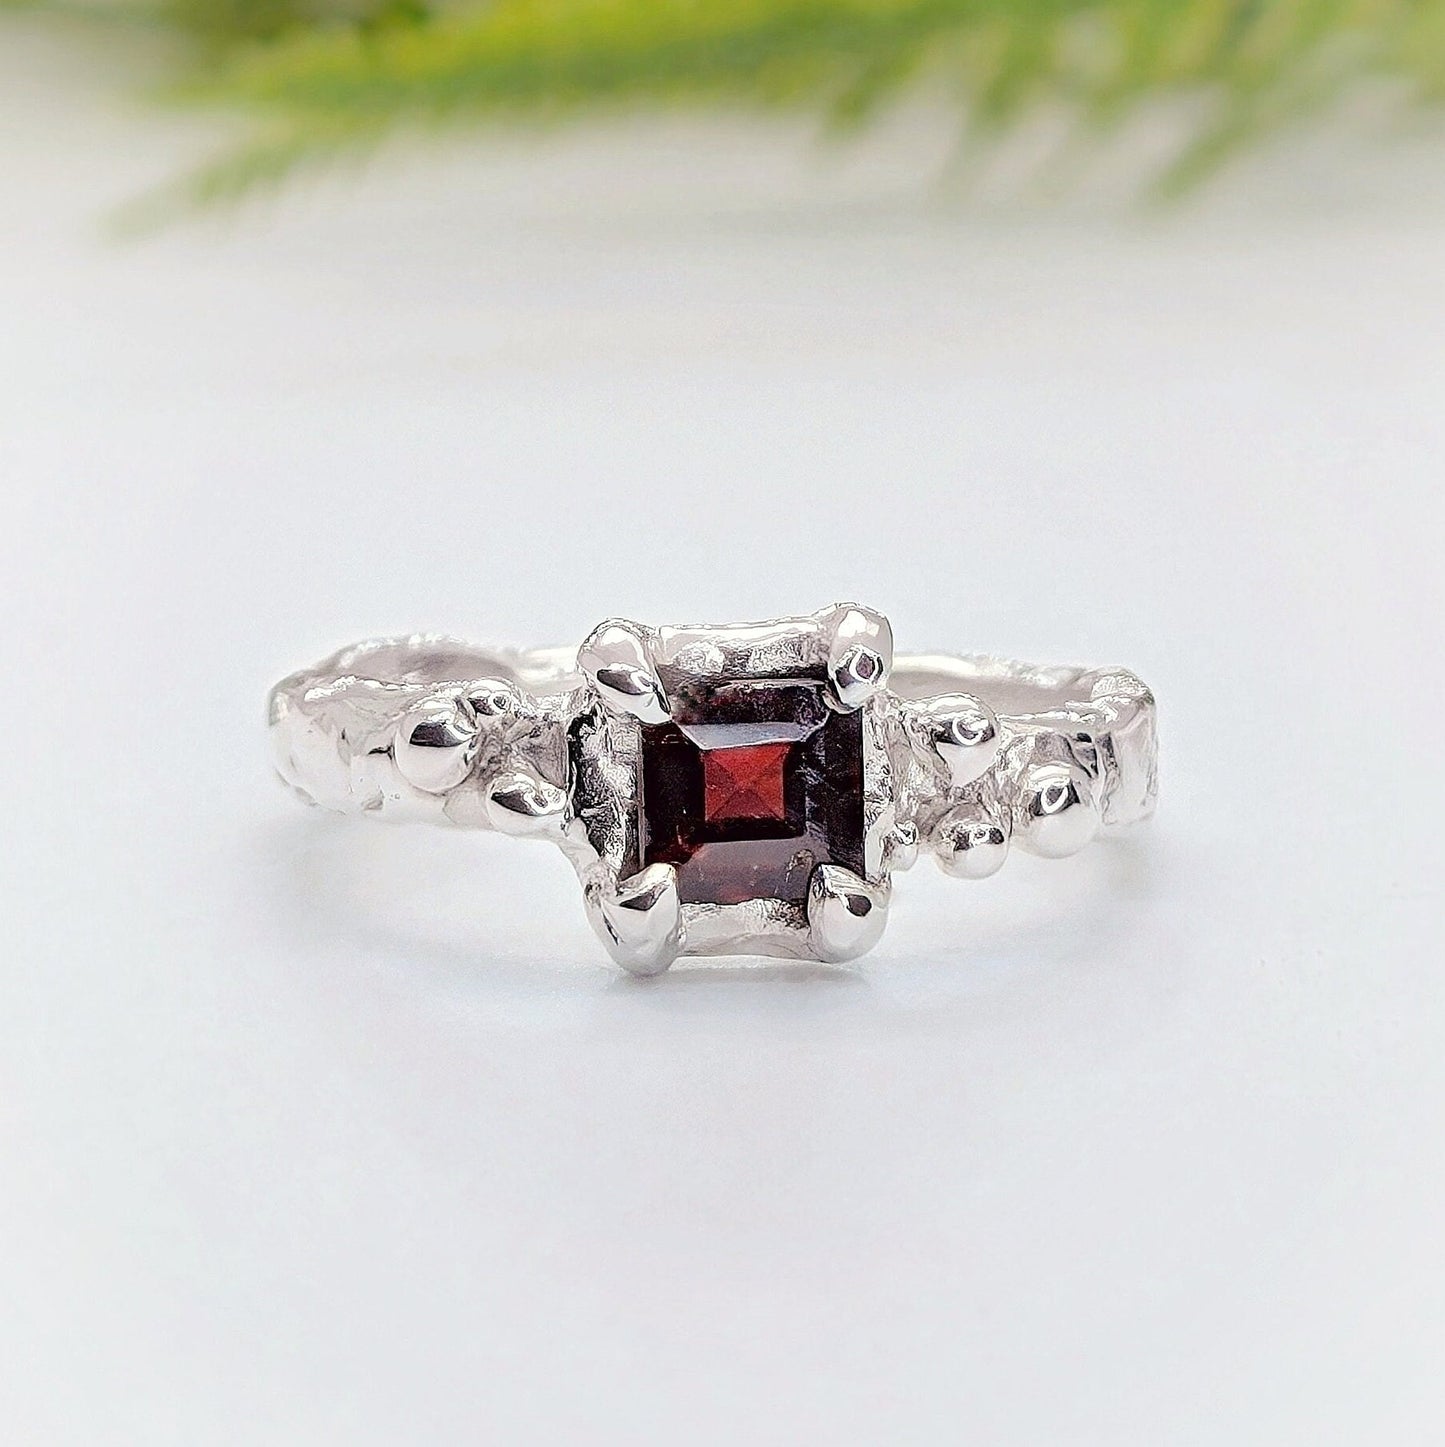 Red square Garnet set by prongs on a Solid Sterling Silver Molten textured band